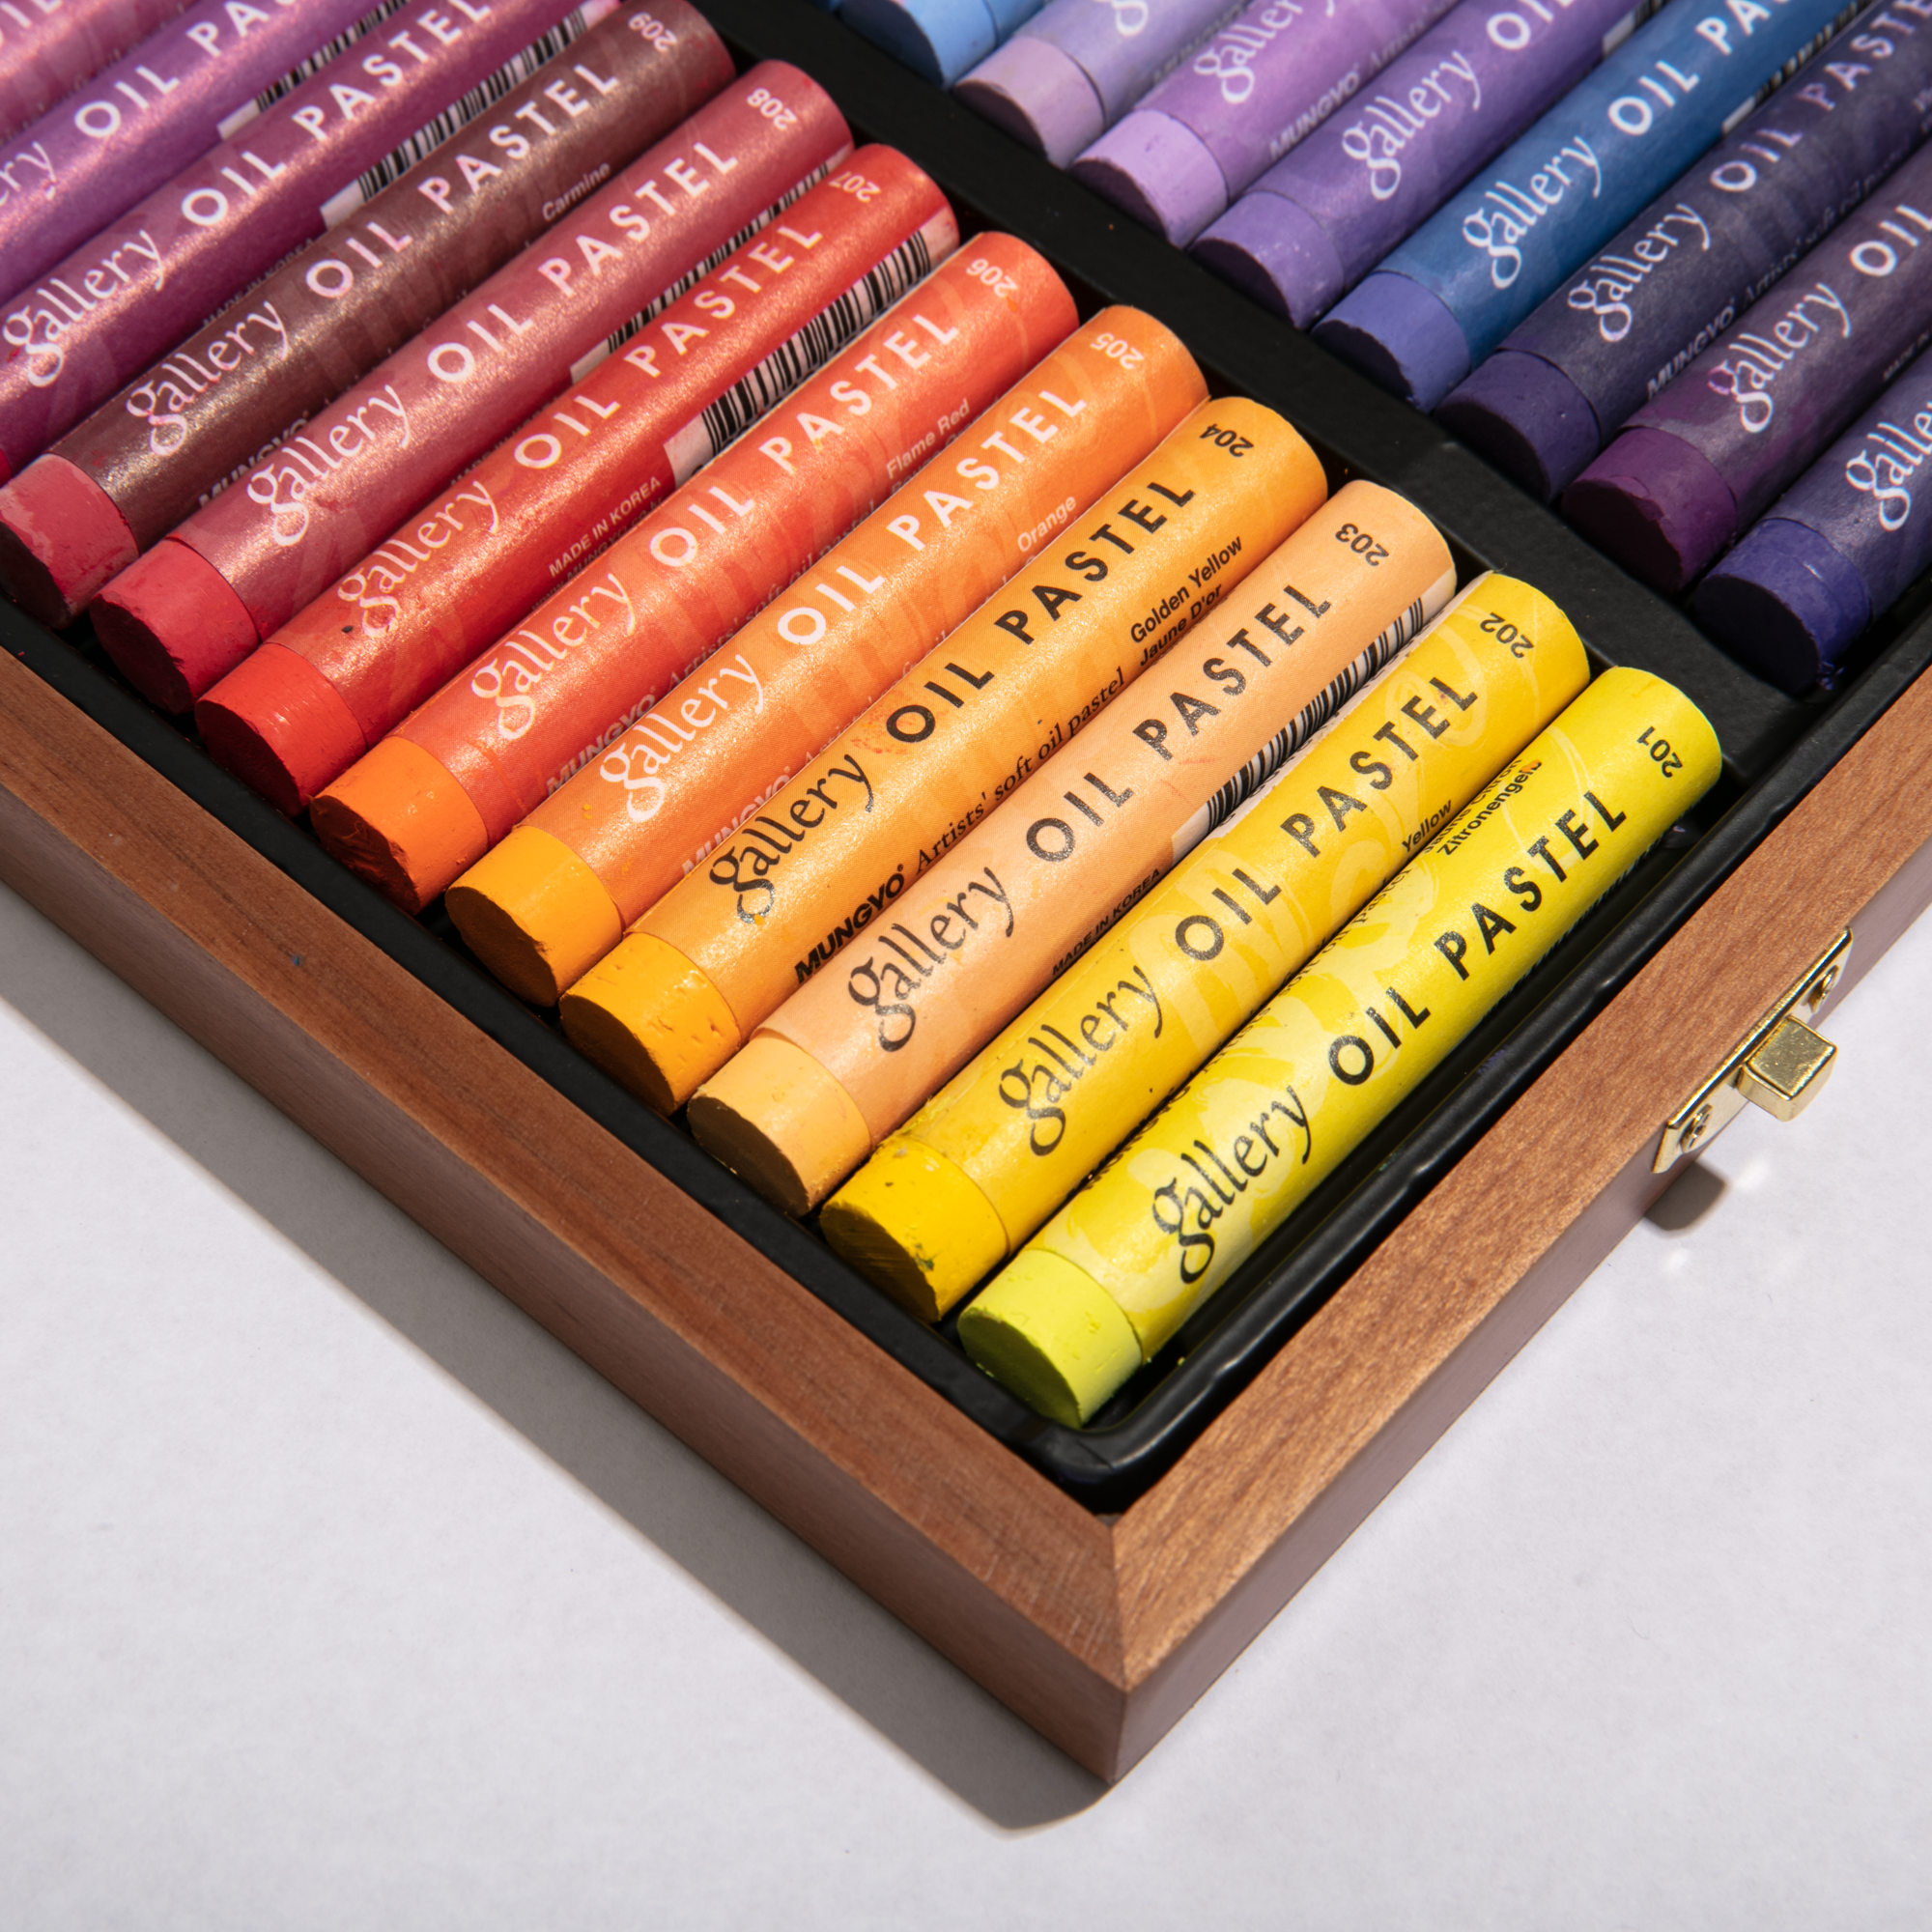 The Mungyo Gallery Artist Soft Pastels - Set 72 in Wooden Box 569 at  incredible prices